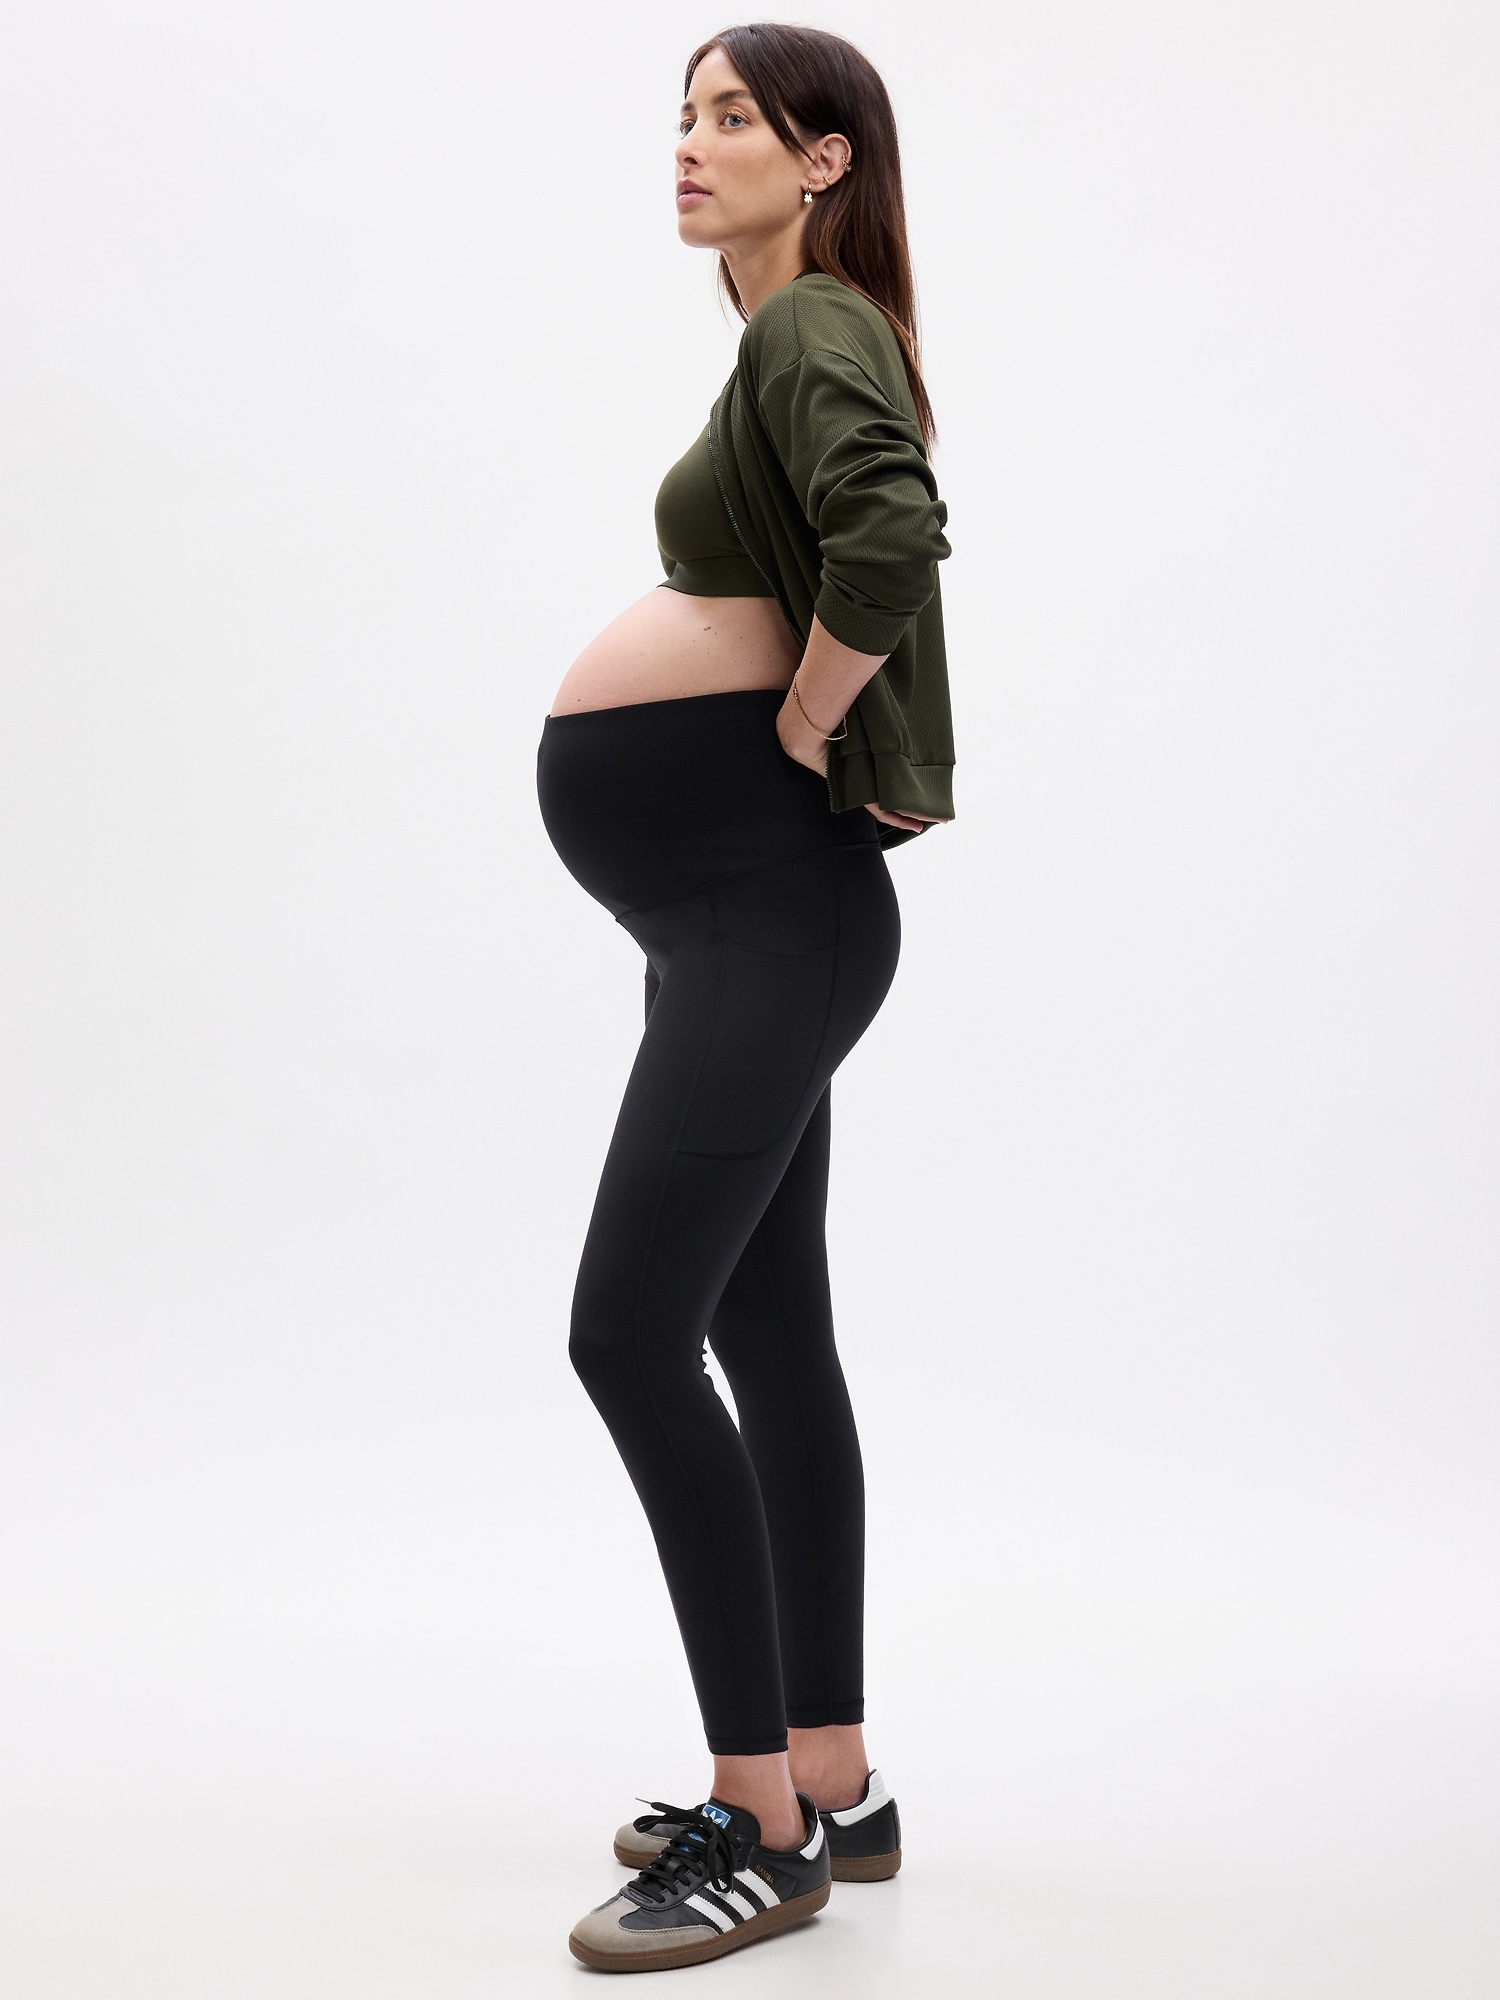 Joyspels Maternity Leggings Over the Belly with Pockets, Size SM, NWT